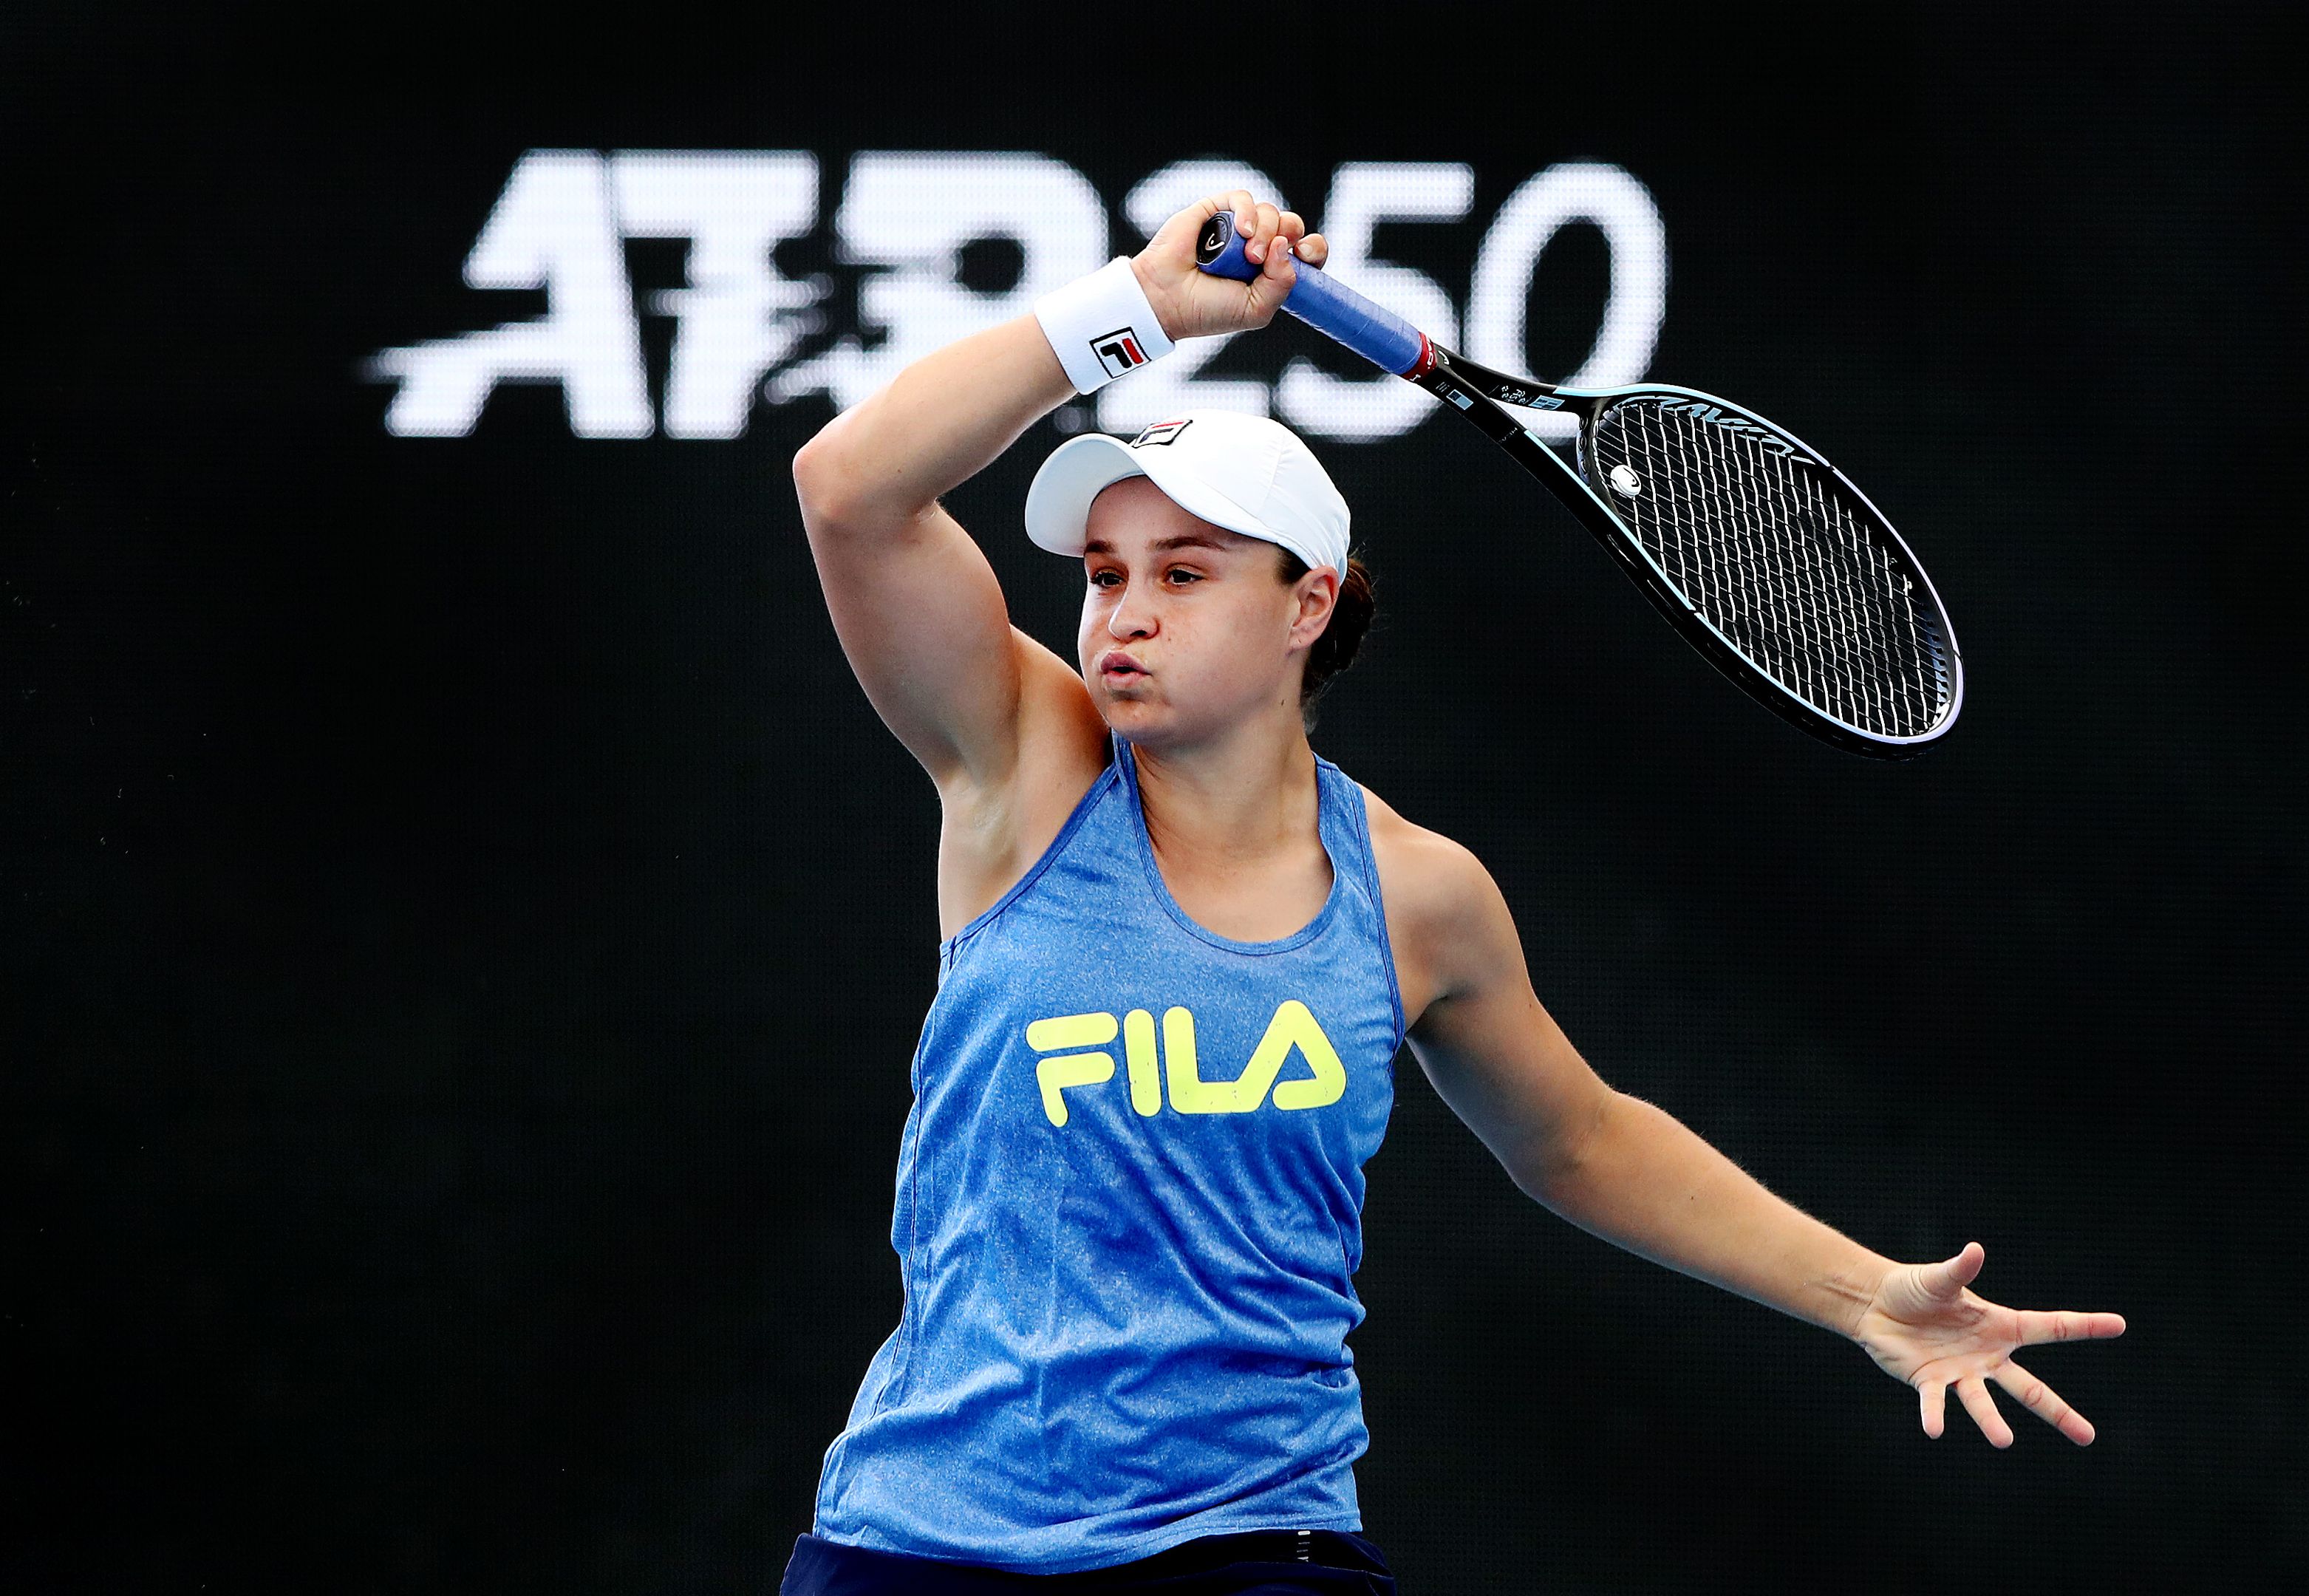 Tennis legend Pam Shriver doubts Ash Barty can hold onto top spot for another year